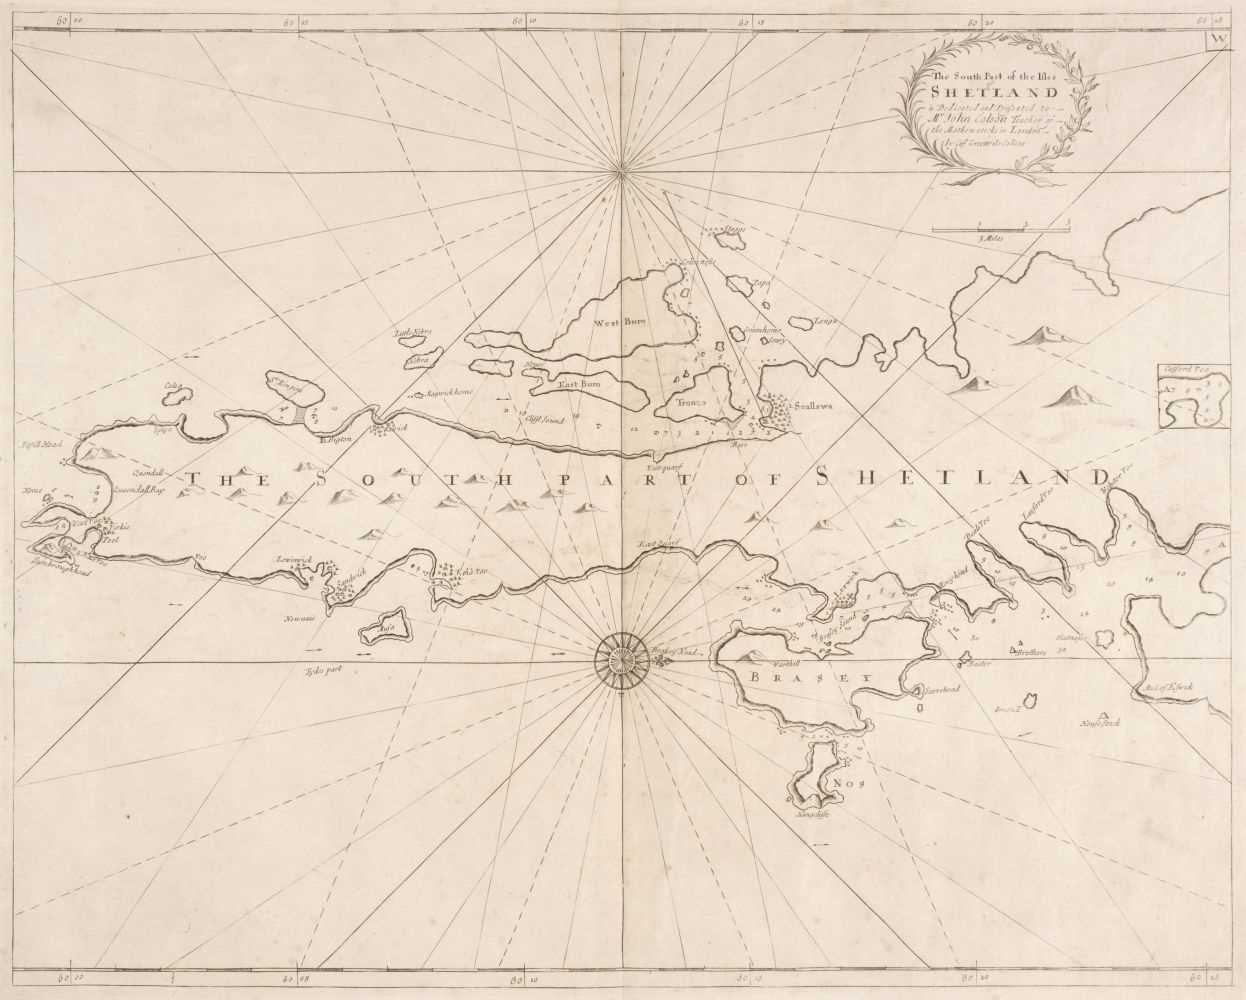 Lot 13 - Collins (Capt. Greenville). The South part of the Isles of Shetland, circa 1720